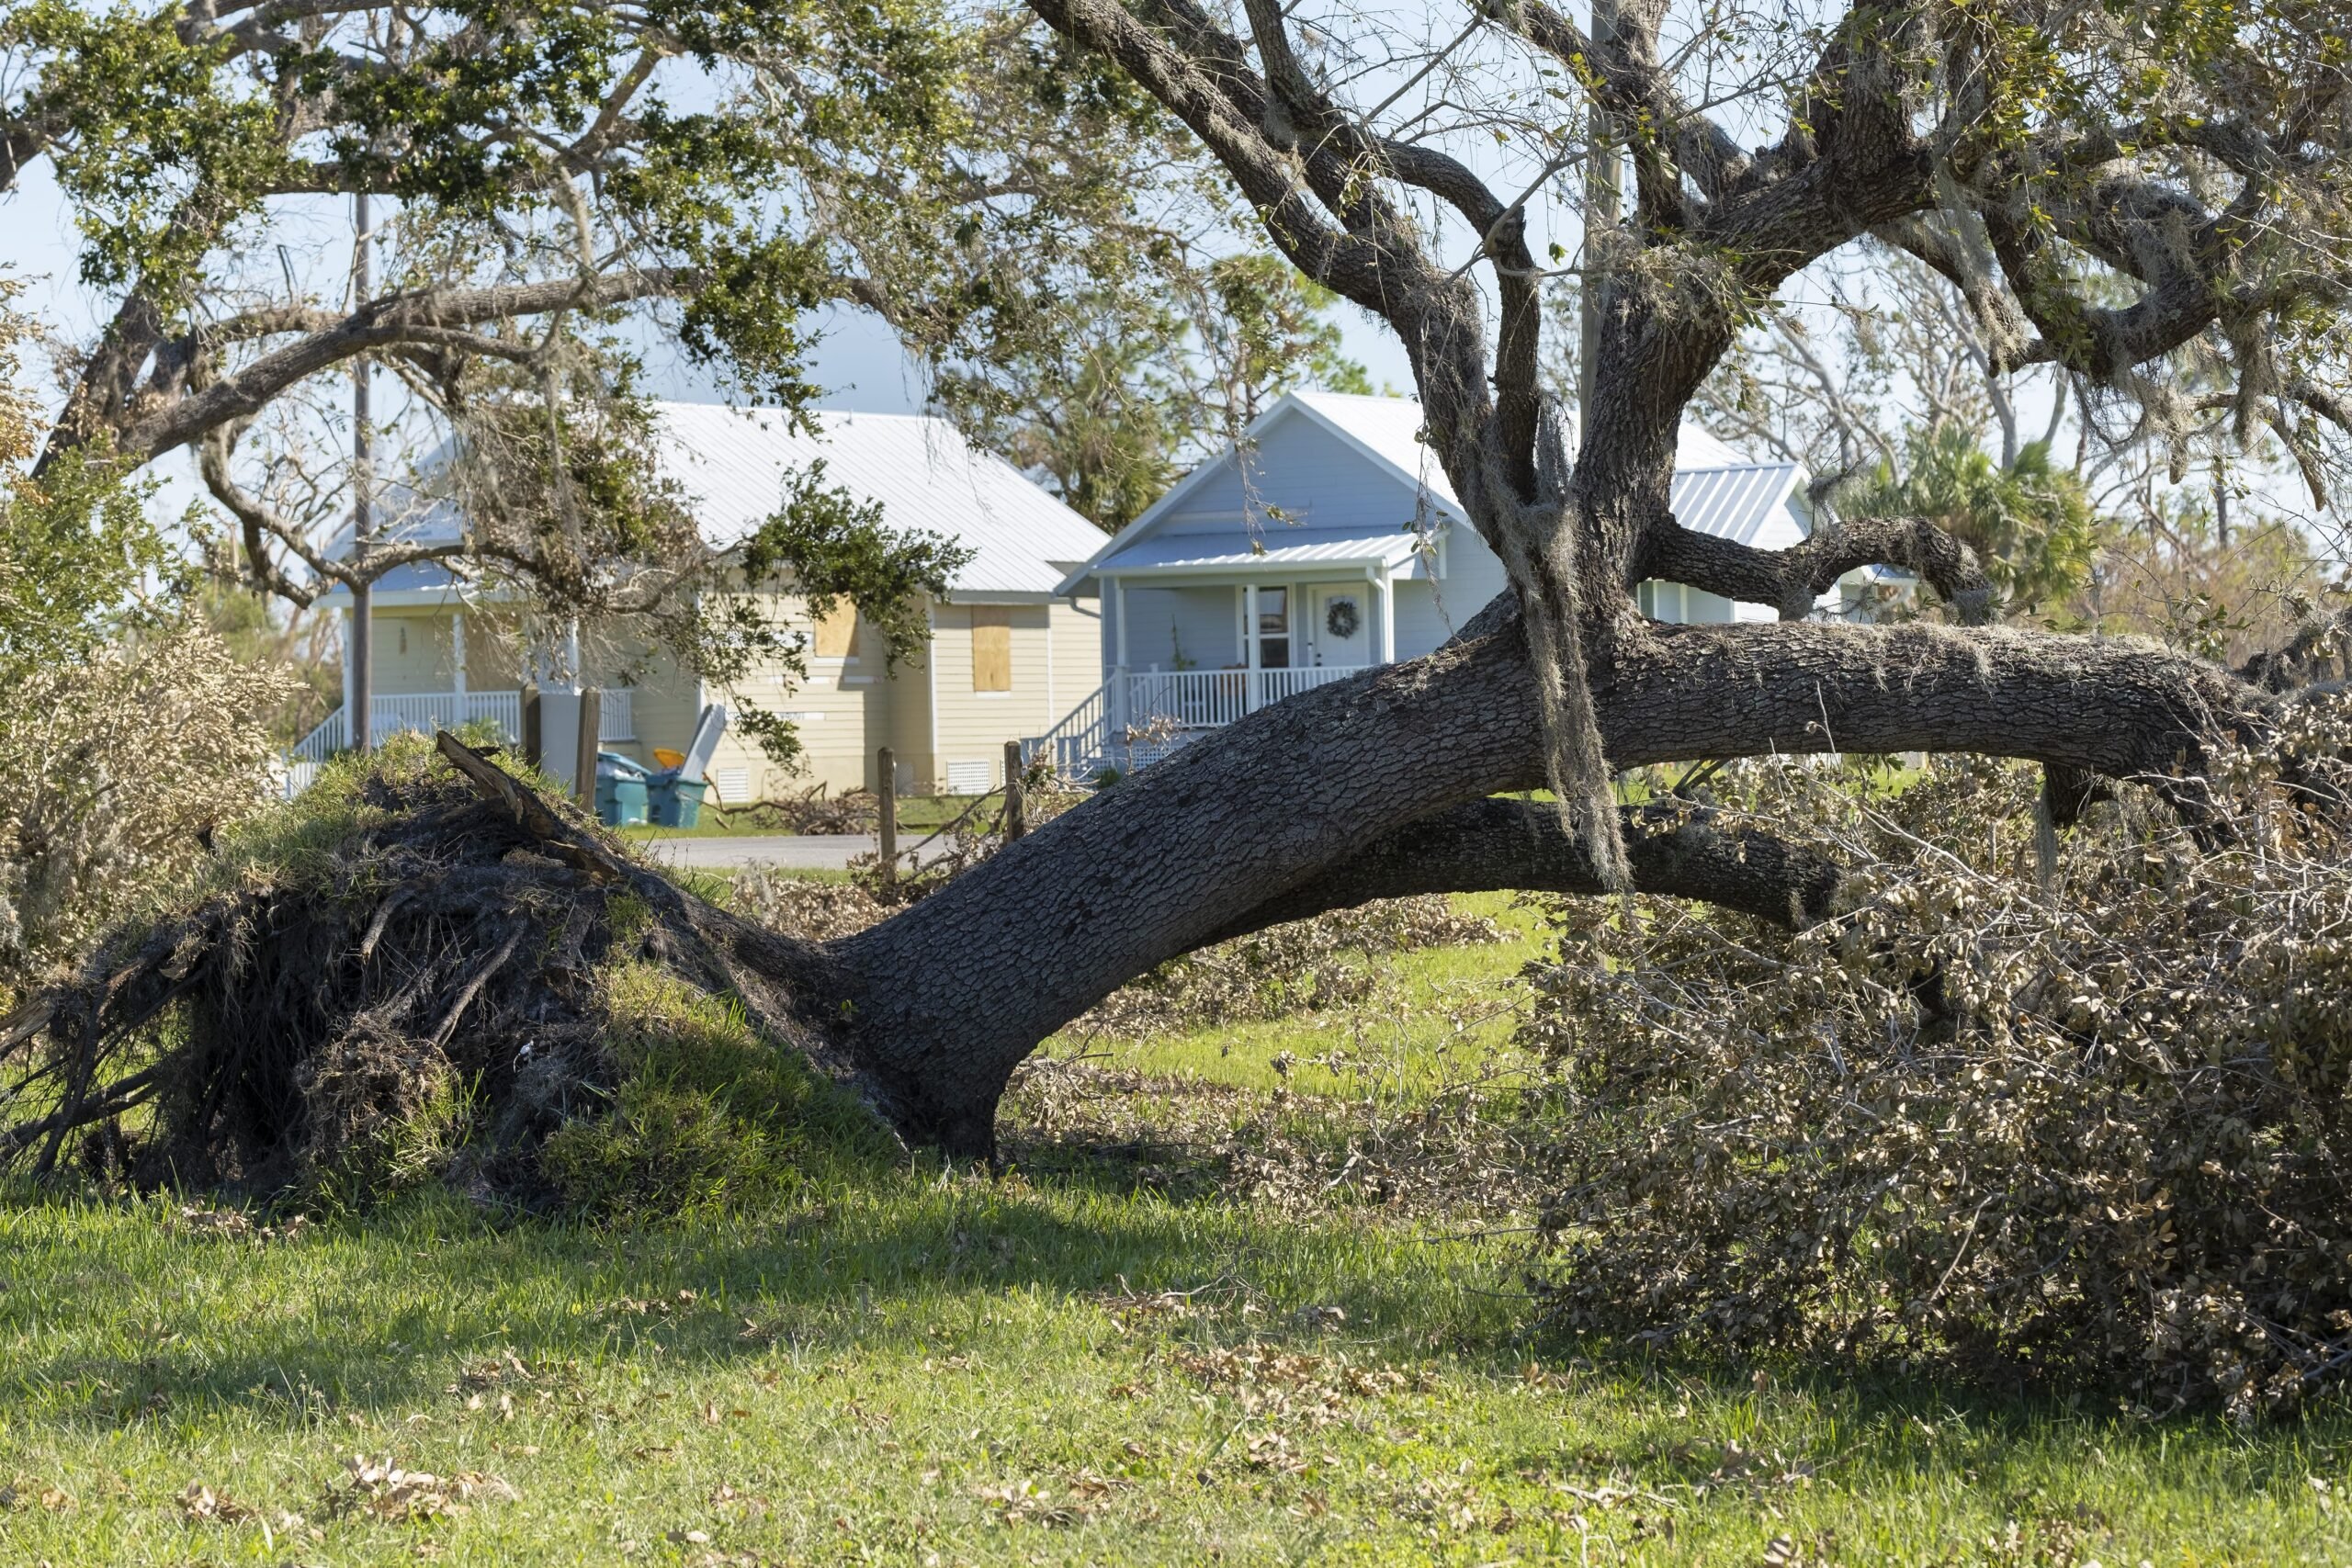 Tree Removal Near Tomball, TX